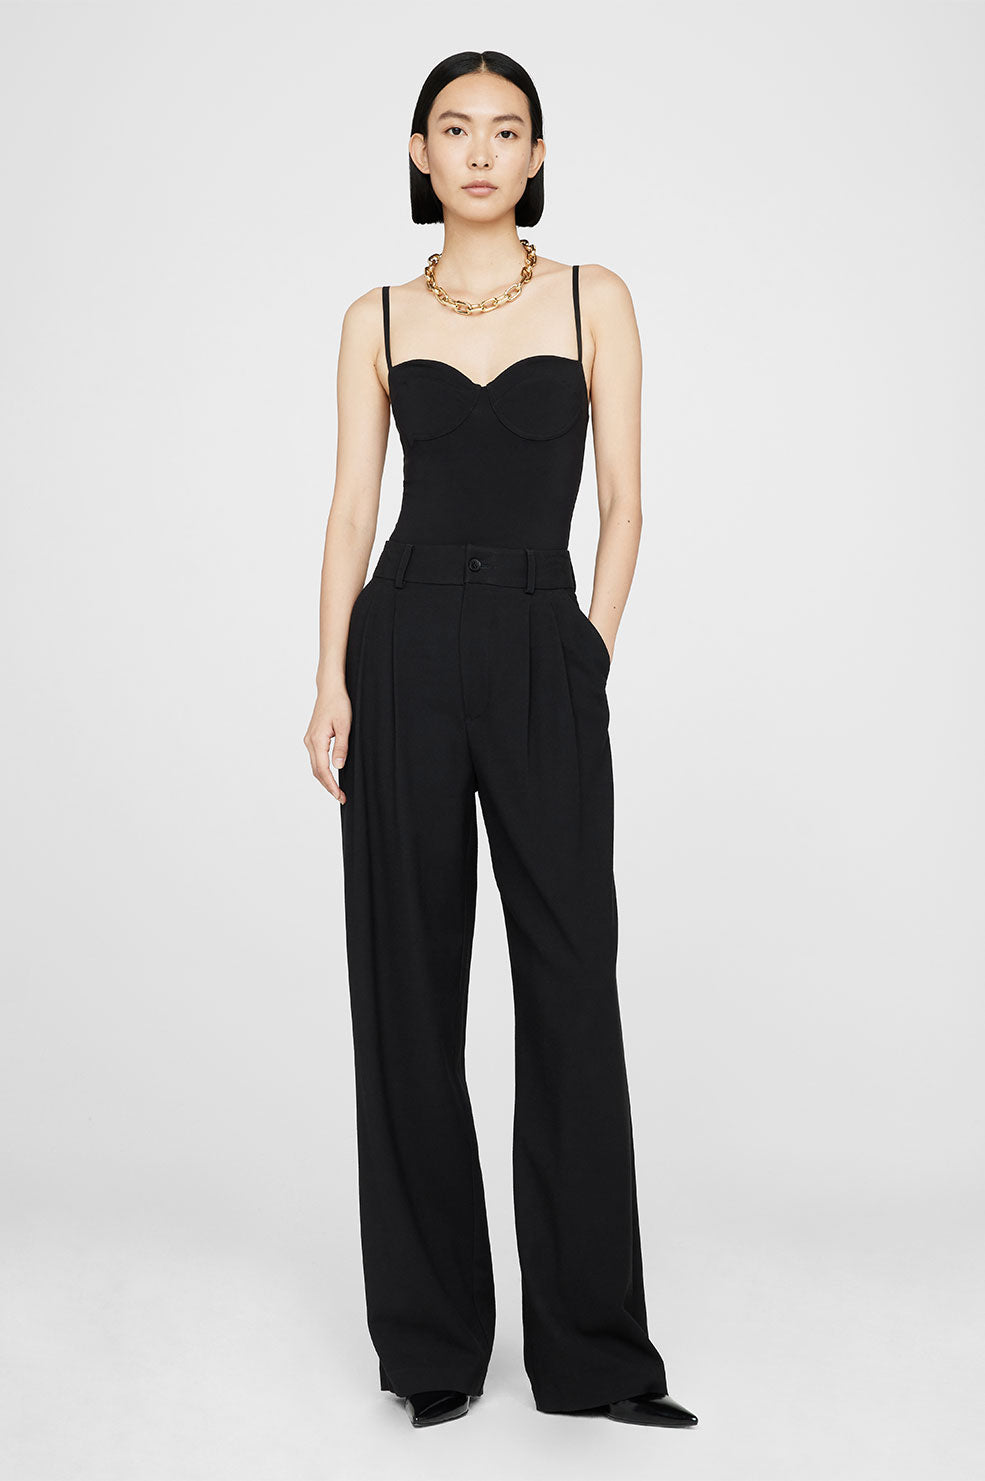 ANINE BING Carrie Pant - Black Twill - On Model Front